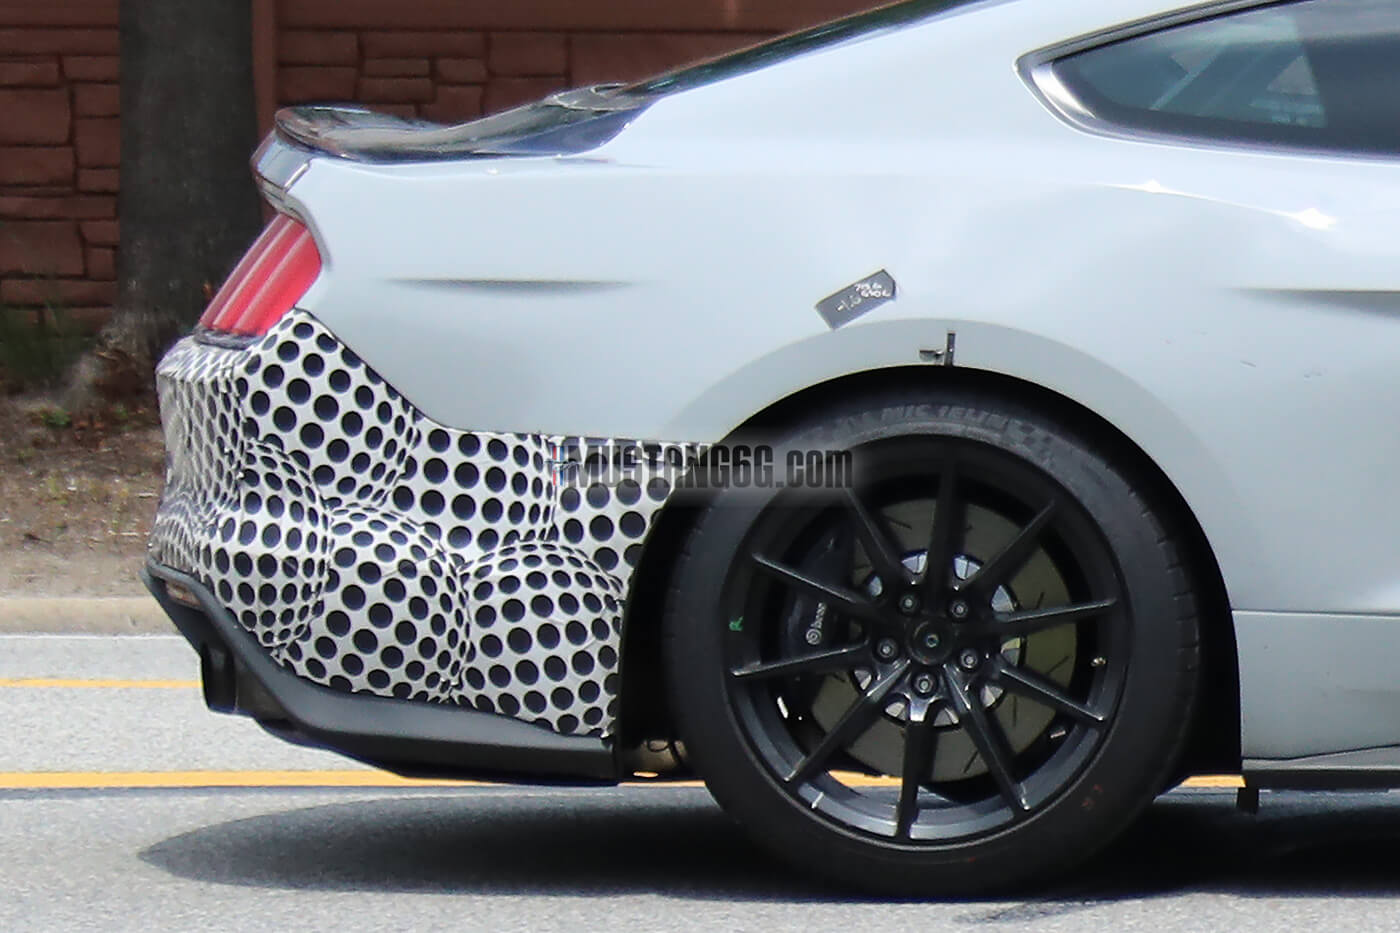 2020 Shelby GT500 Horsepower, Specs, Photos, & Colors - 2020 Shelby GT500 Brakes